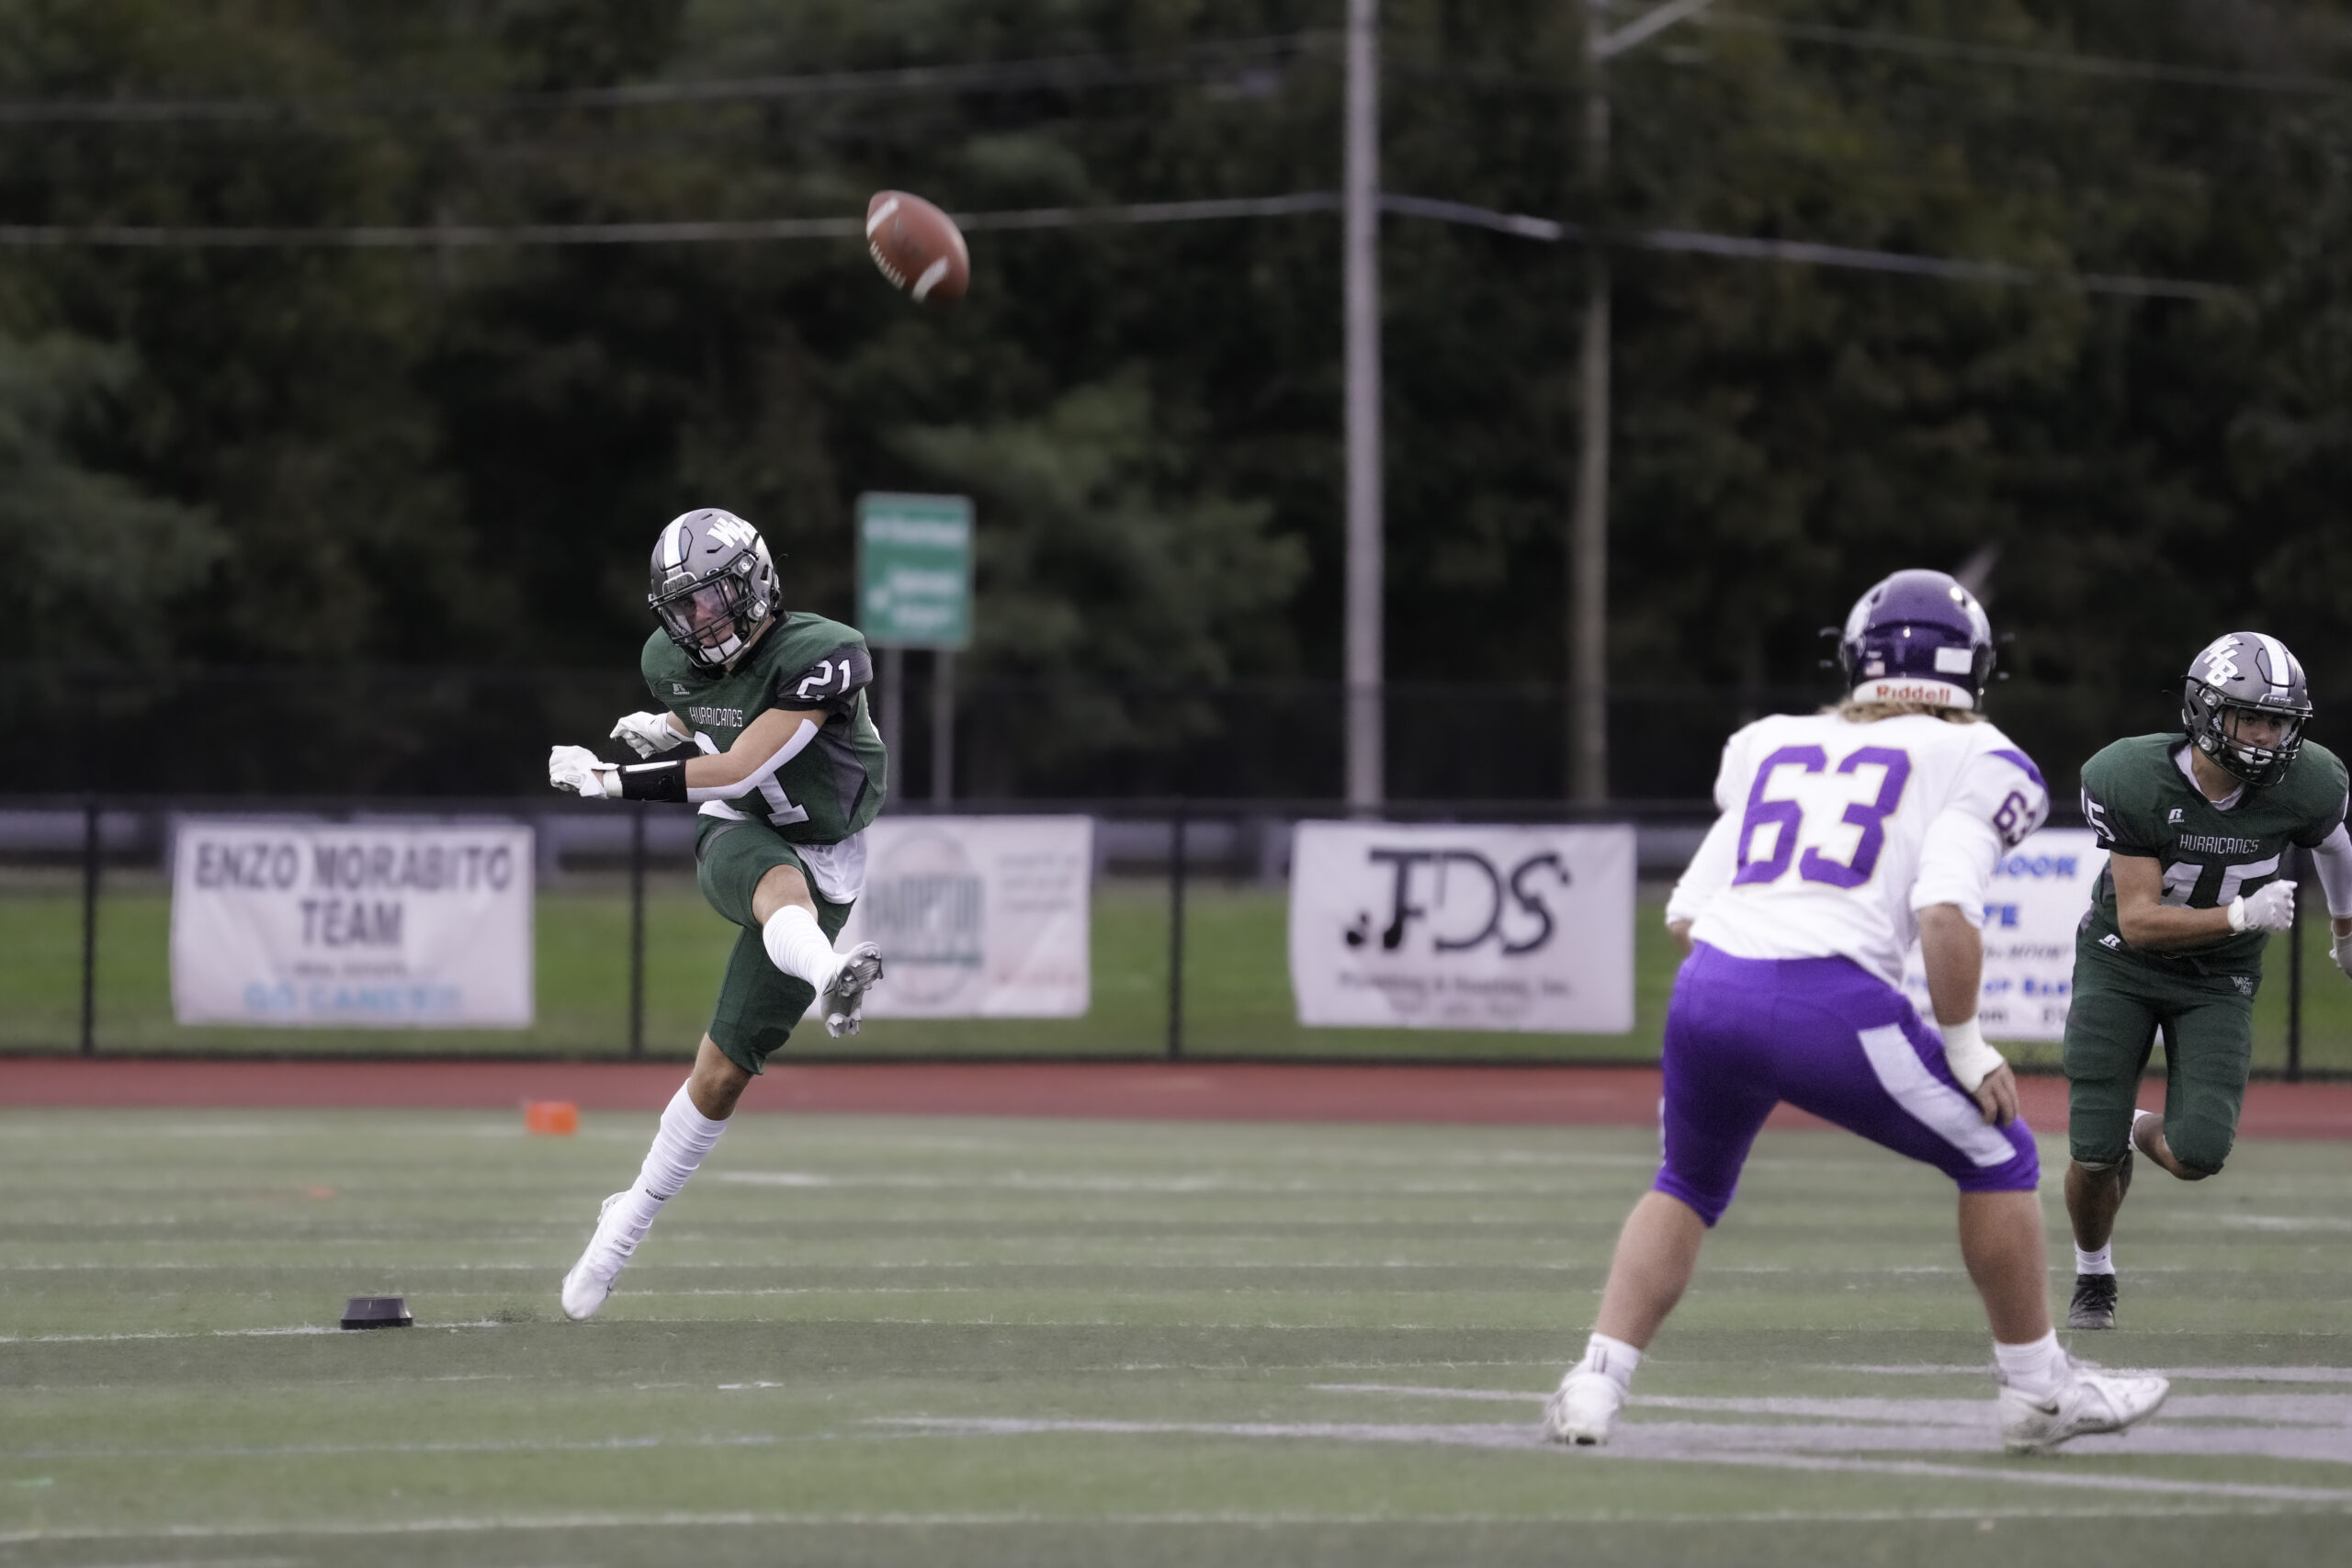 The Westhampton Beach Hurricanes were up 20-0 after the first quarter and 34-0 at halftime en route to a win over Islip at home on Friday night, which kept the Hurricanes undefeated on the season. RON ESPOSITO